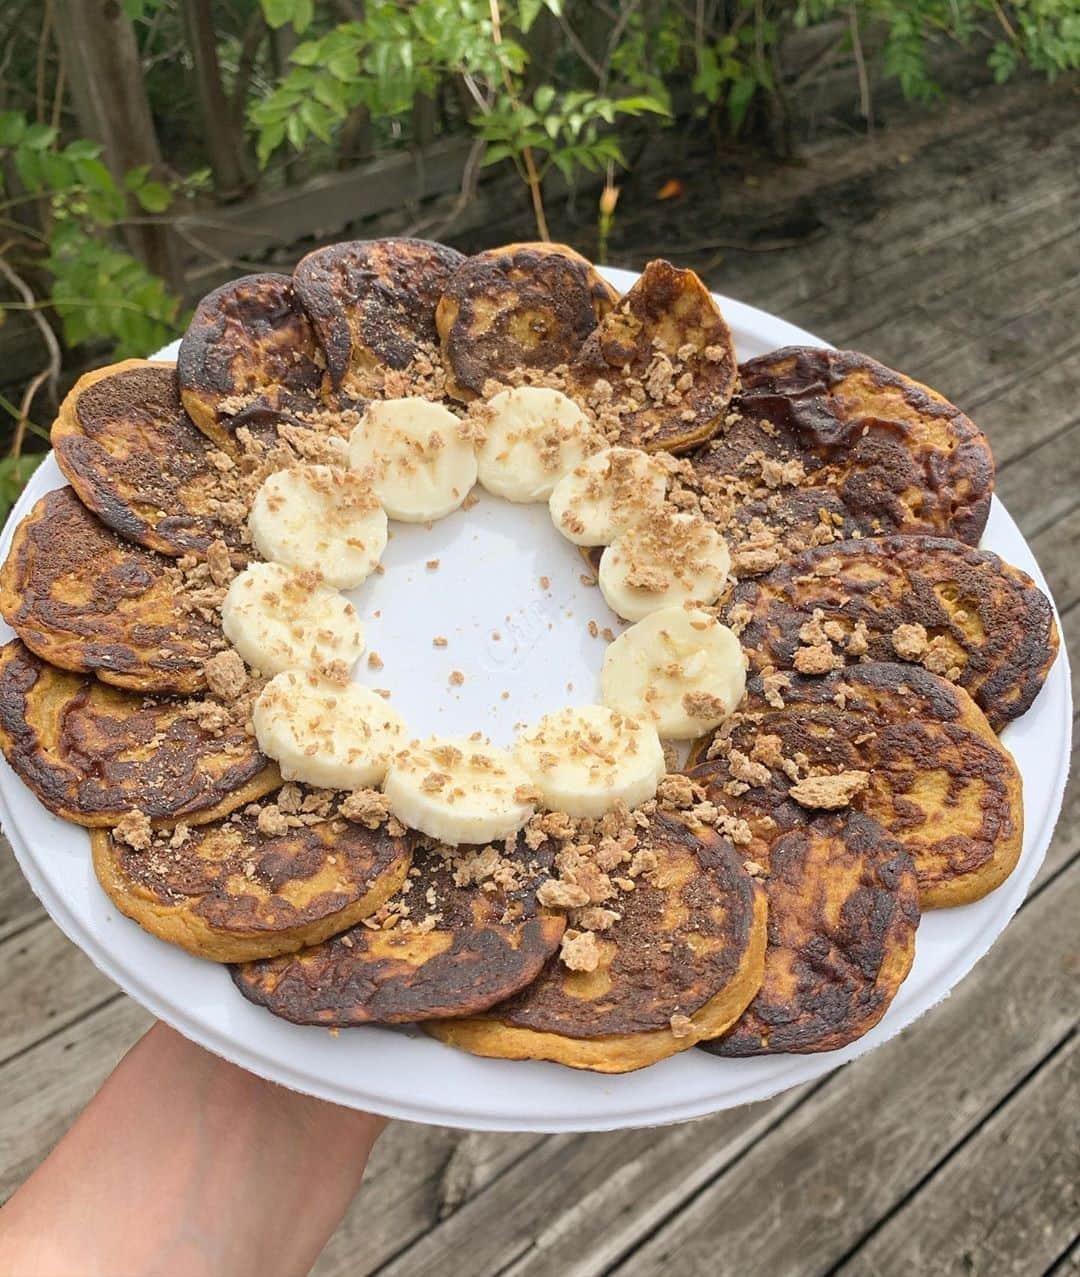 Flavorgod Seasoningsさんのインスタグラム写真 - (Flavorgod SeasoningsInstagram)「Pumpkin coconut flour protein pancakes!⁠ -⁠ Customer:👉 @ams.eats⁠ Made with:👉 #Flavorgod Pumpkin Pie Topper⁠ -⁠ Add delicious flavors to your meals!⬇️⁠ Click link in the bio -> @flavorgod  www.flavorgod.com⁠ -⁠ Ingredients:⁠ - 4 oz egg whites⁠ - 4 oz pumpkin purée⁠ - 1 tsp vanilla extract⁠ - 1/4-1/3 cup almond milk⁠ - 1 tbsp maple syrup⁠ - 1/2 tsp apple cider vinegar⁠ - 28 g coconut flour⁠ - 1 tbsp monk fruit sweetener⁠ - 1 tsp pumpkin spice seasoning⁠ - 1 tsp cinnamon⁠ - 1/2 tsp baking powder⁠ - 1/2 tsp baking soda⁠ ⁠ Instructions:⁠ - whip egg whites and sweetener together with a beater until peaks are formed⁠ - add wet ingredients and beat until mixed together⁠ - add dry ingredients and beat until mixed together⁠ - heat griddle to 400F and cook pancakes for about 2-3 minutes before flipping. Then cook for about 1-2 minutes on the other side⁠ - assemble pancakes and add toppings (I used banana and granola)⁠ ⁠ Nutrition Facts w/o toppings:⁠ - calories: 239⁠ - carbs: 27.9 g⁠ - protein: 18.7 g⁠ - fat: 5.2 g⁠ - fiber: 16 g⁠ - sugar: 4.7 g⁠ -⁠ Flavor God Seasonings are:⁠ 🍩ZERO CALORIES PER SERVING🍩⁠ 🍩MADE FRESH⁠ 🍩MADE LOCALLY IN US⁠ 🍩FREE GIFTS AT CHECKOUT⁠ 🍩GLUTEN FREE⁠ 🍩#PALEO & #KETO FRIENDLY⁠」9月13日 21時01分 - flavorgod